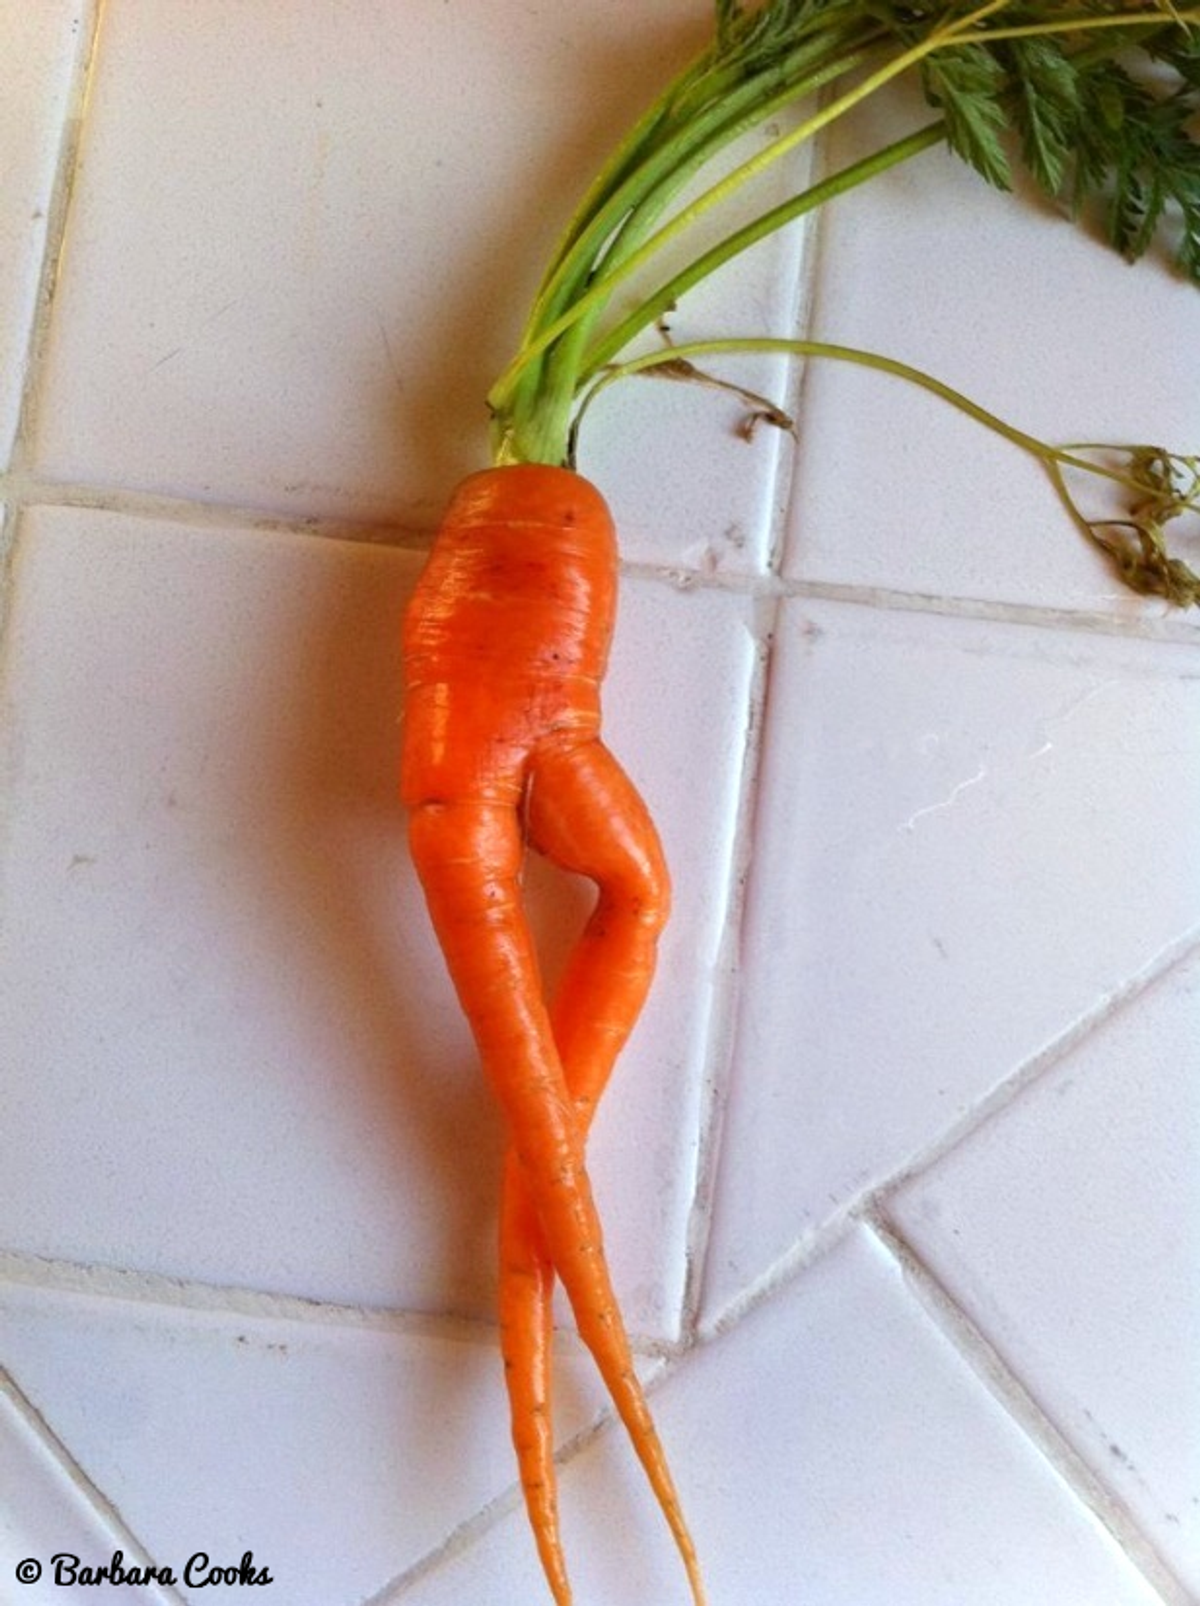 5 Carrots With Charming Backstories